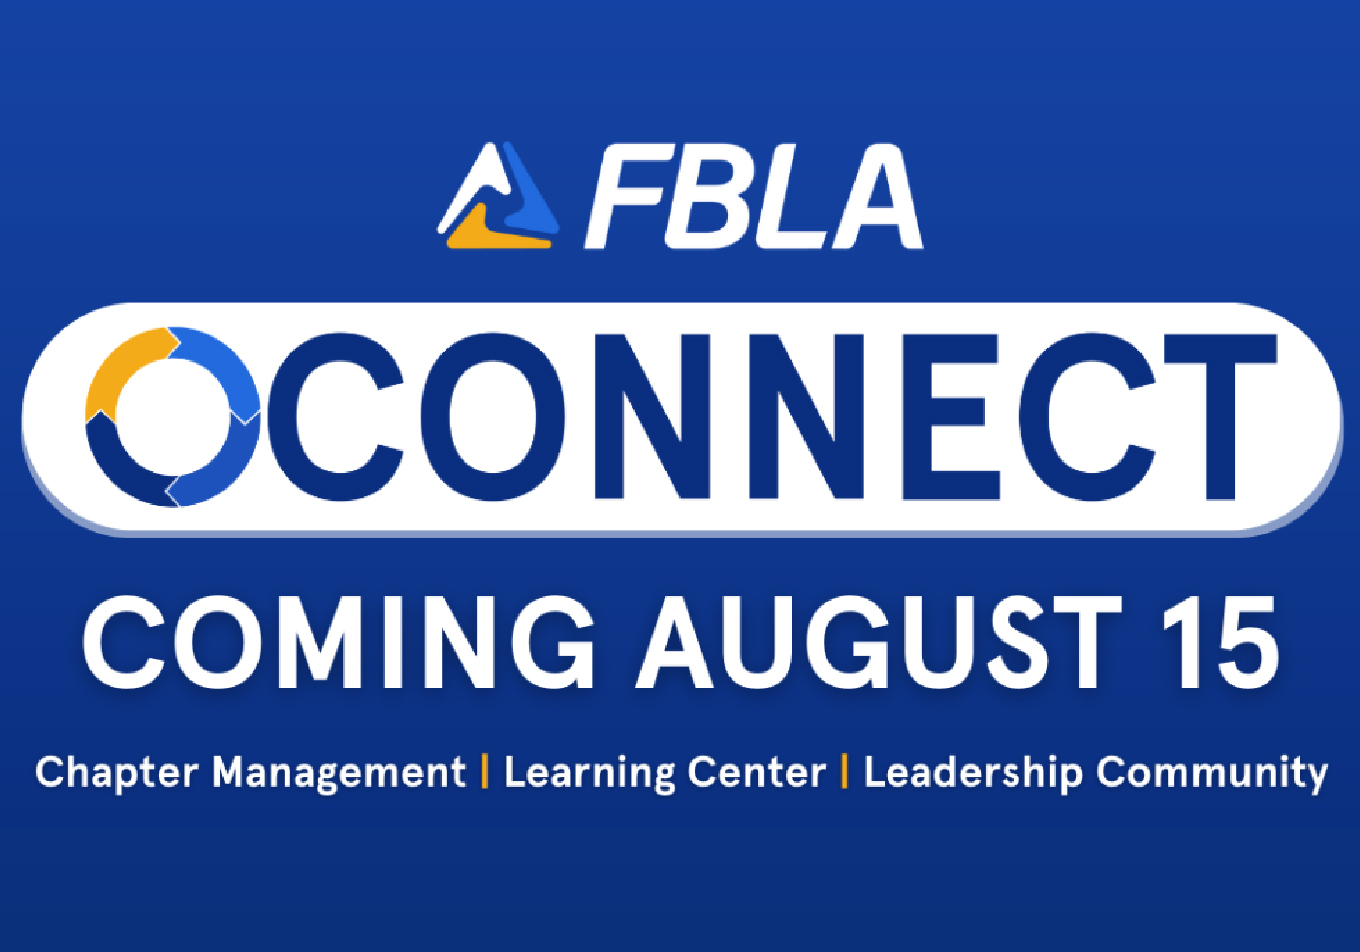 National “FBLA Connect” Membership System